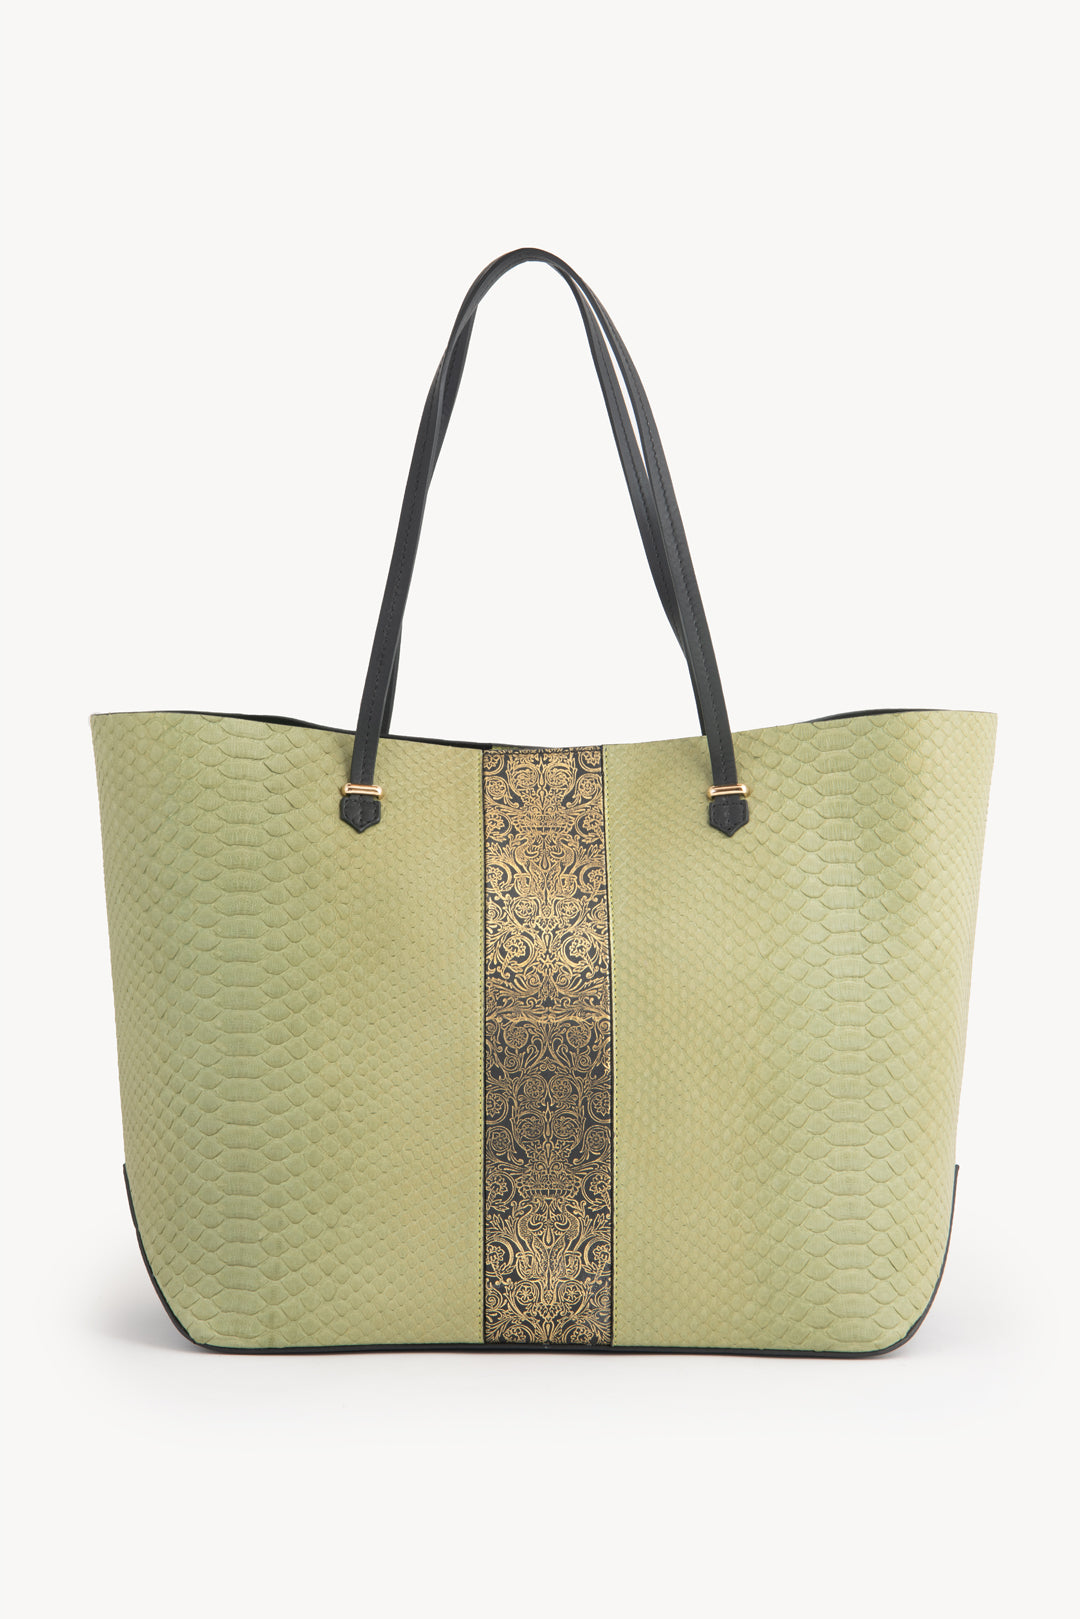 Shopping Bag big size exotic leather - Green and Black